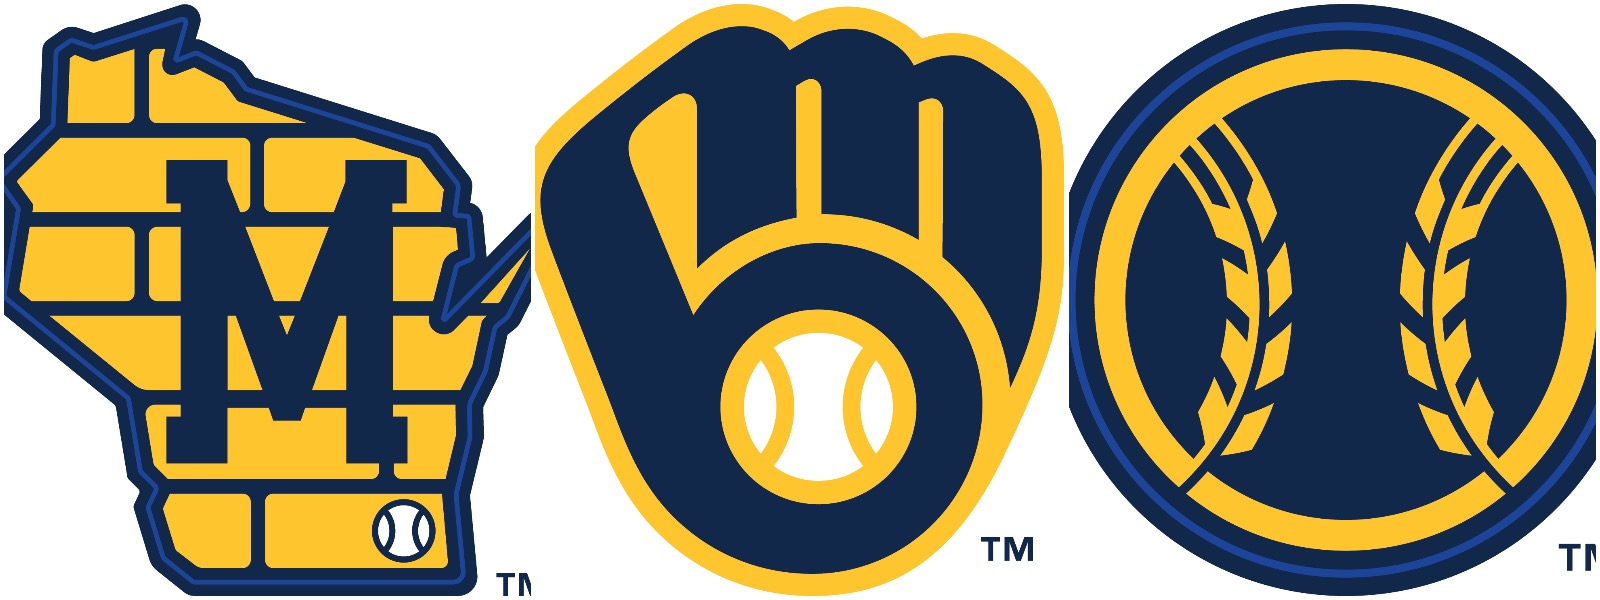 Milwaukee Brewers unveil new uniforms, revamped ball-in-glove logo